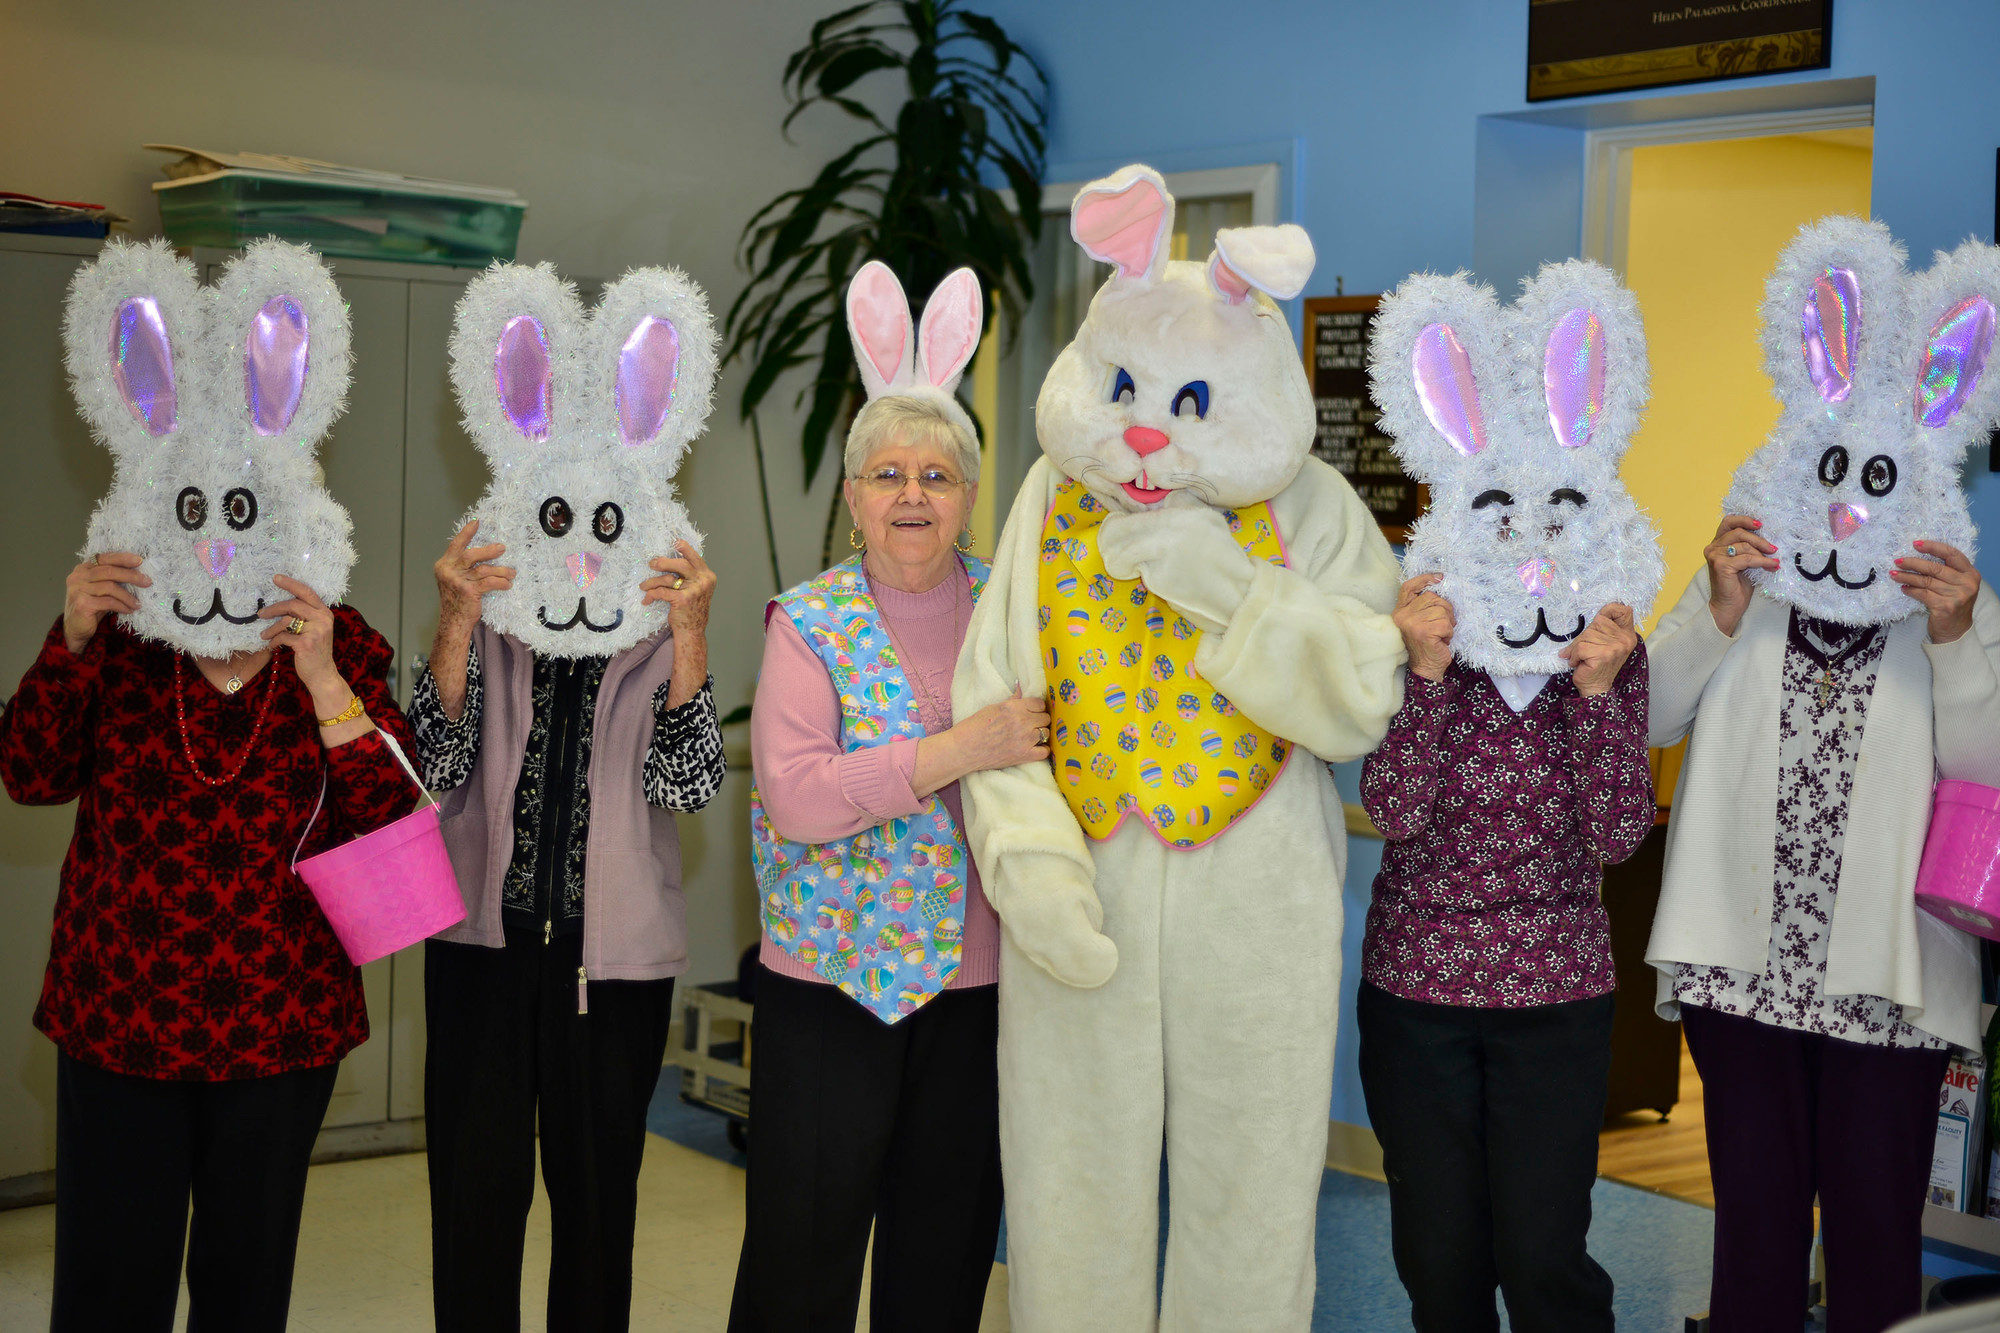 Phyllis Caggiano, third from the left, the membership president of the East Meadow Senior Center, along with Charlie Franza as the Easter Bunny, ignited the holiday spirit at the East Meadow Senior Center on April 8.